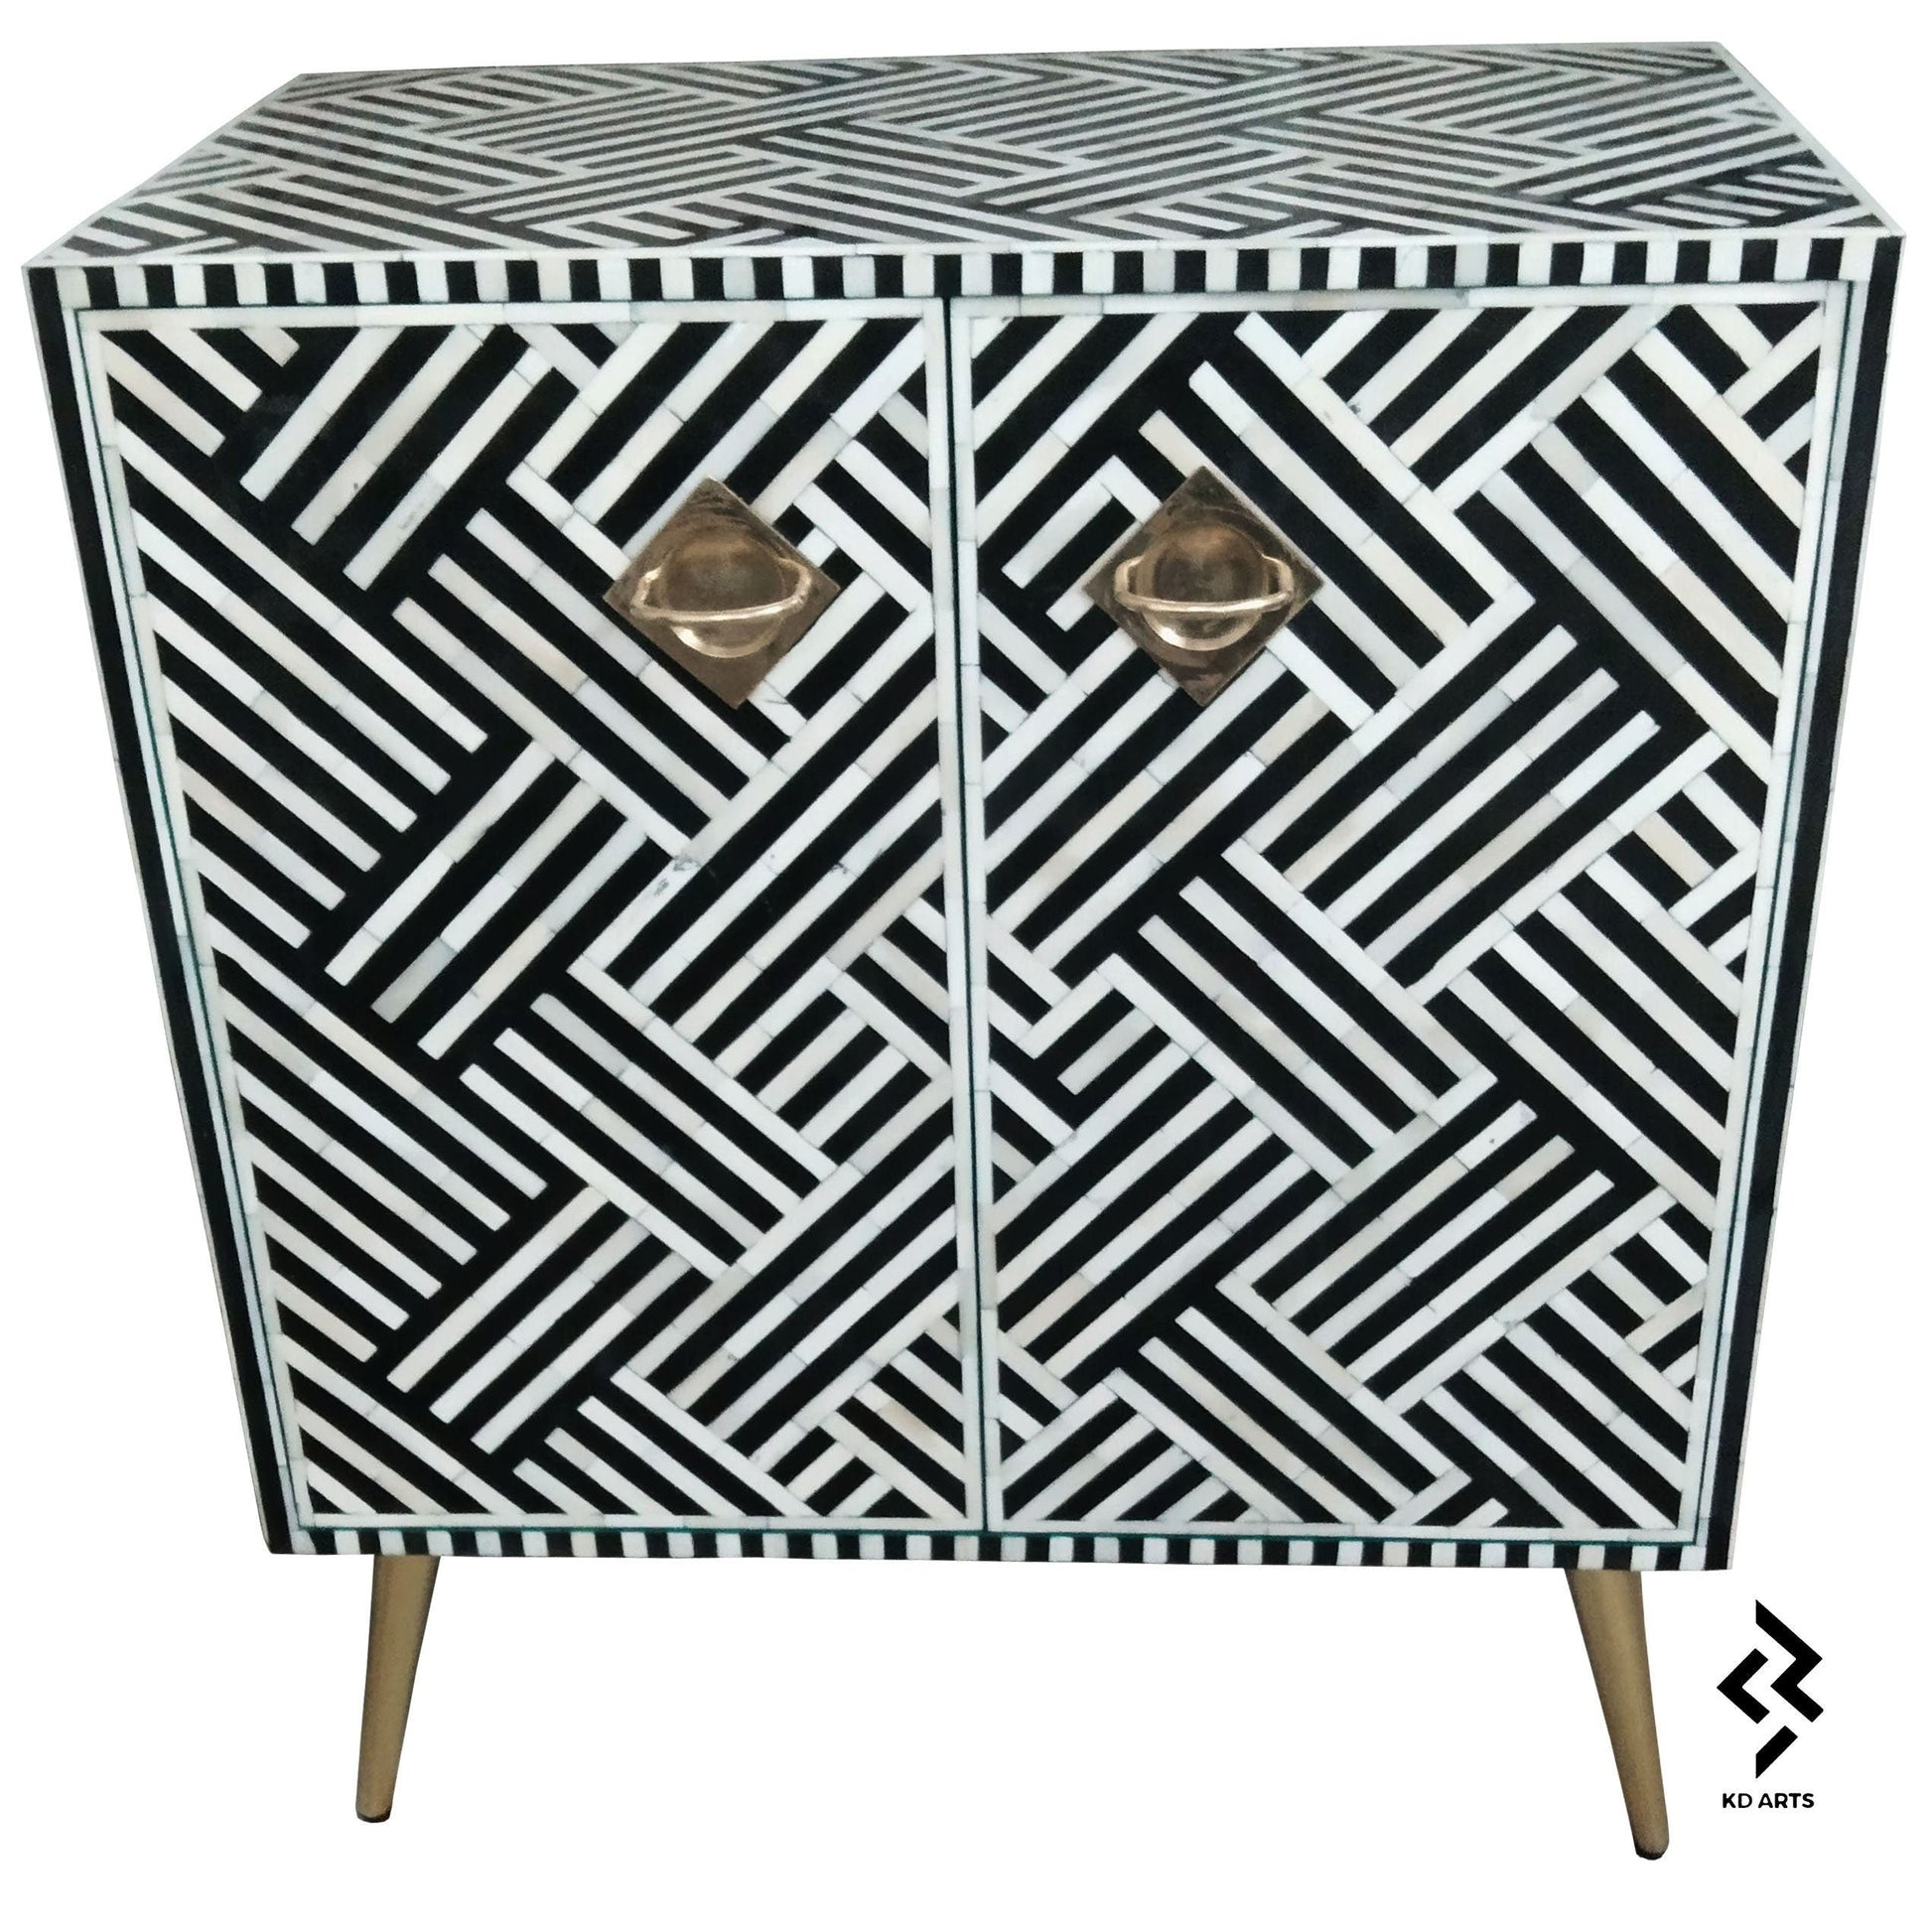 Bone inlay media cabinet/ Two door cabinet with two shelves/ Black crisscross media console/ storage unit/Bone inlay media console